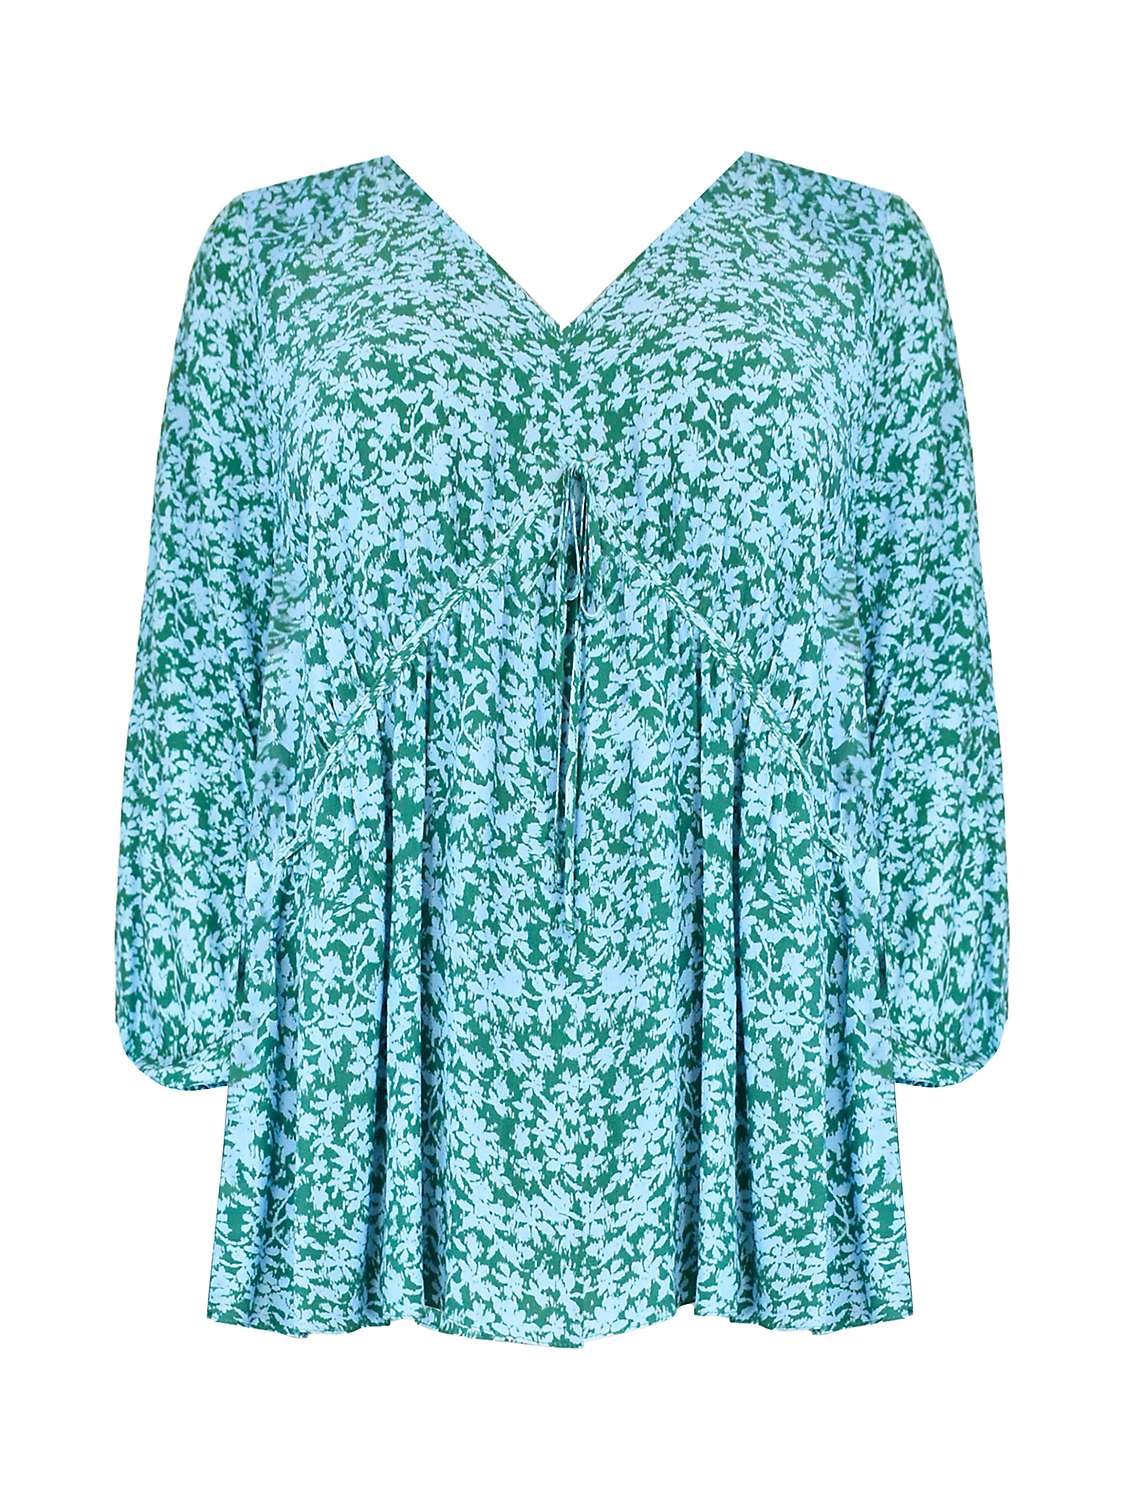 Buy Live Unlimited Curve Ditsy Print Tie Neck Blouse, Bright Blue Online at johnlewis.com